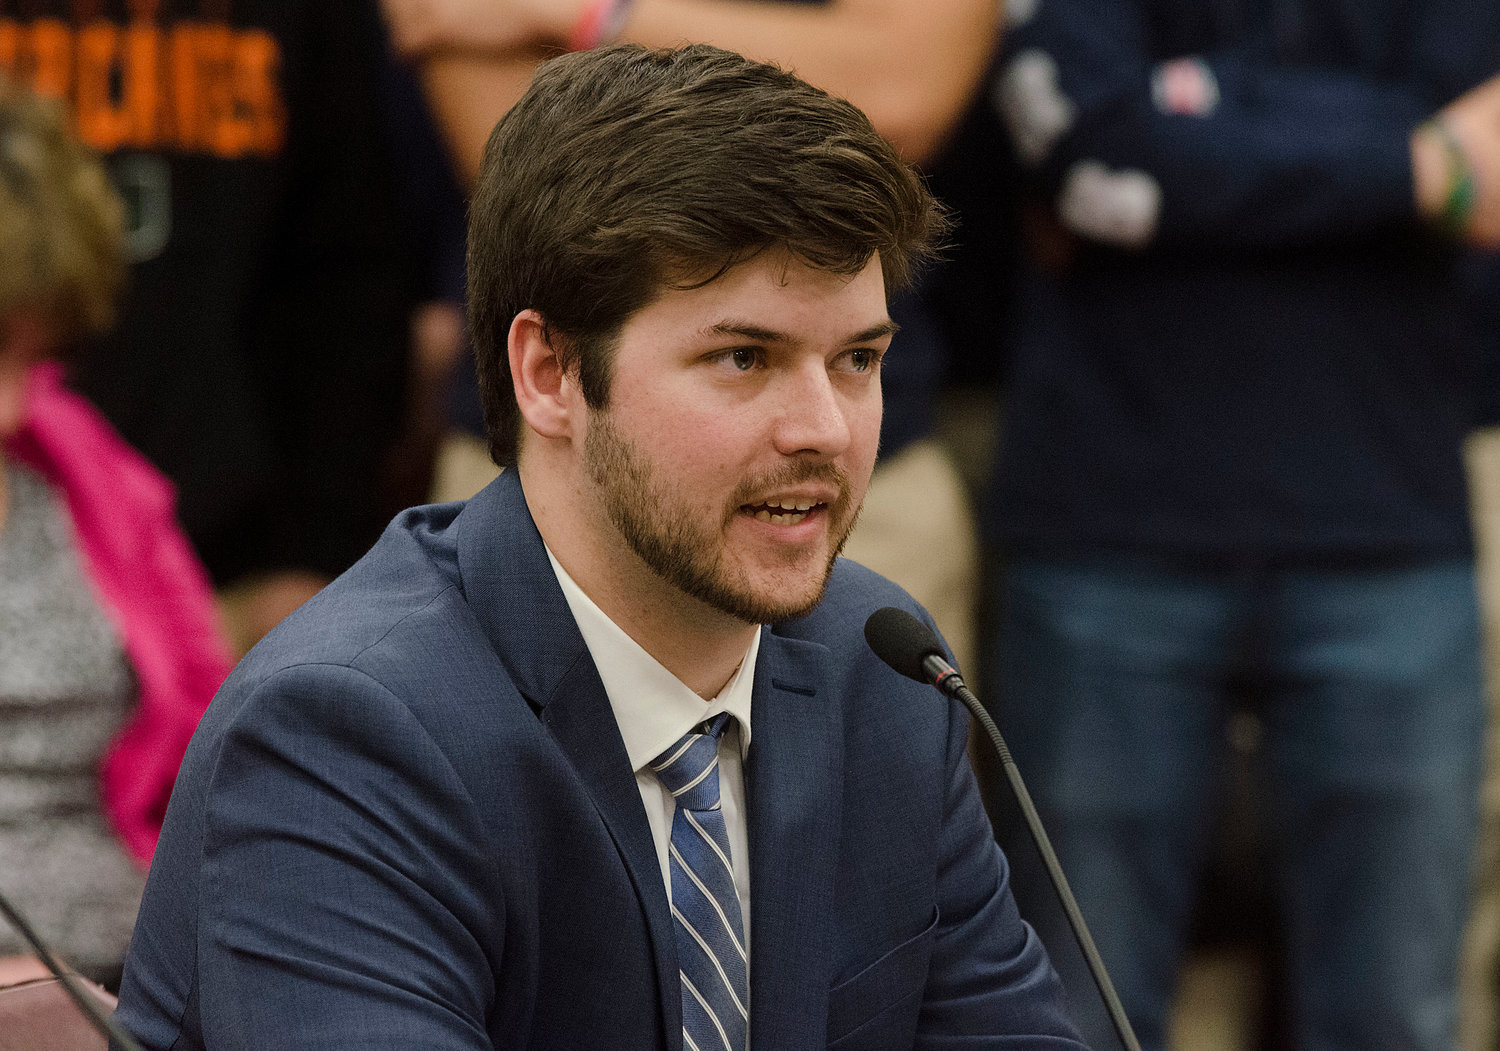 Steven Peterson, executive director of Be Great for Nate, testifies in support of a suicide prevention training bill at the State House in March 2019.